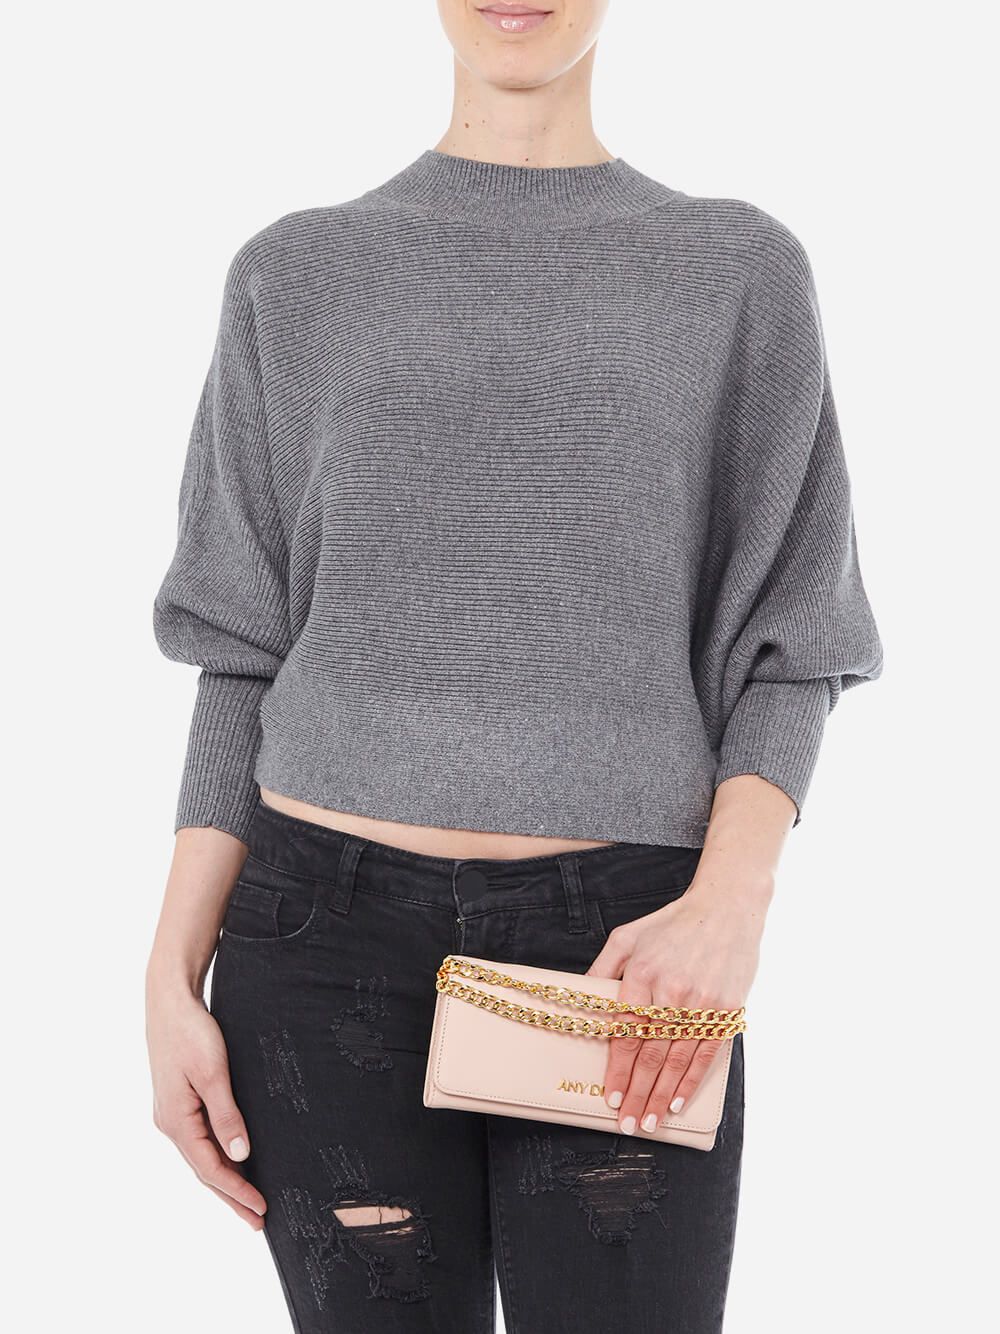 S Pink Clutch and Wallet | Any Di